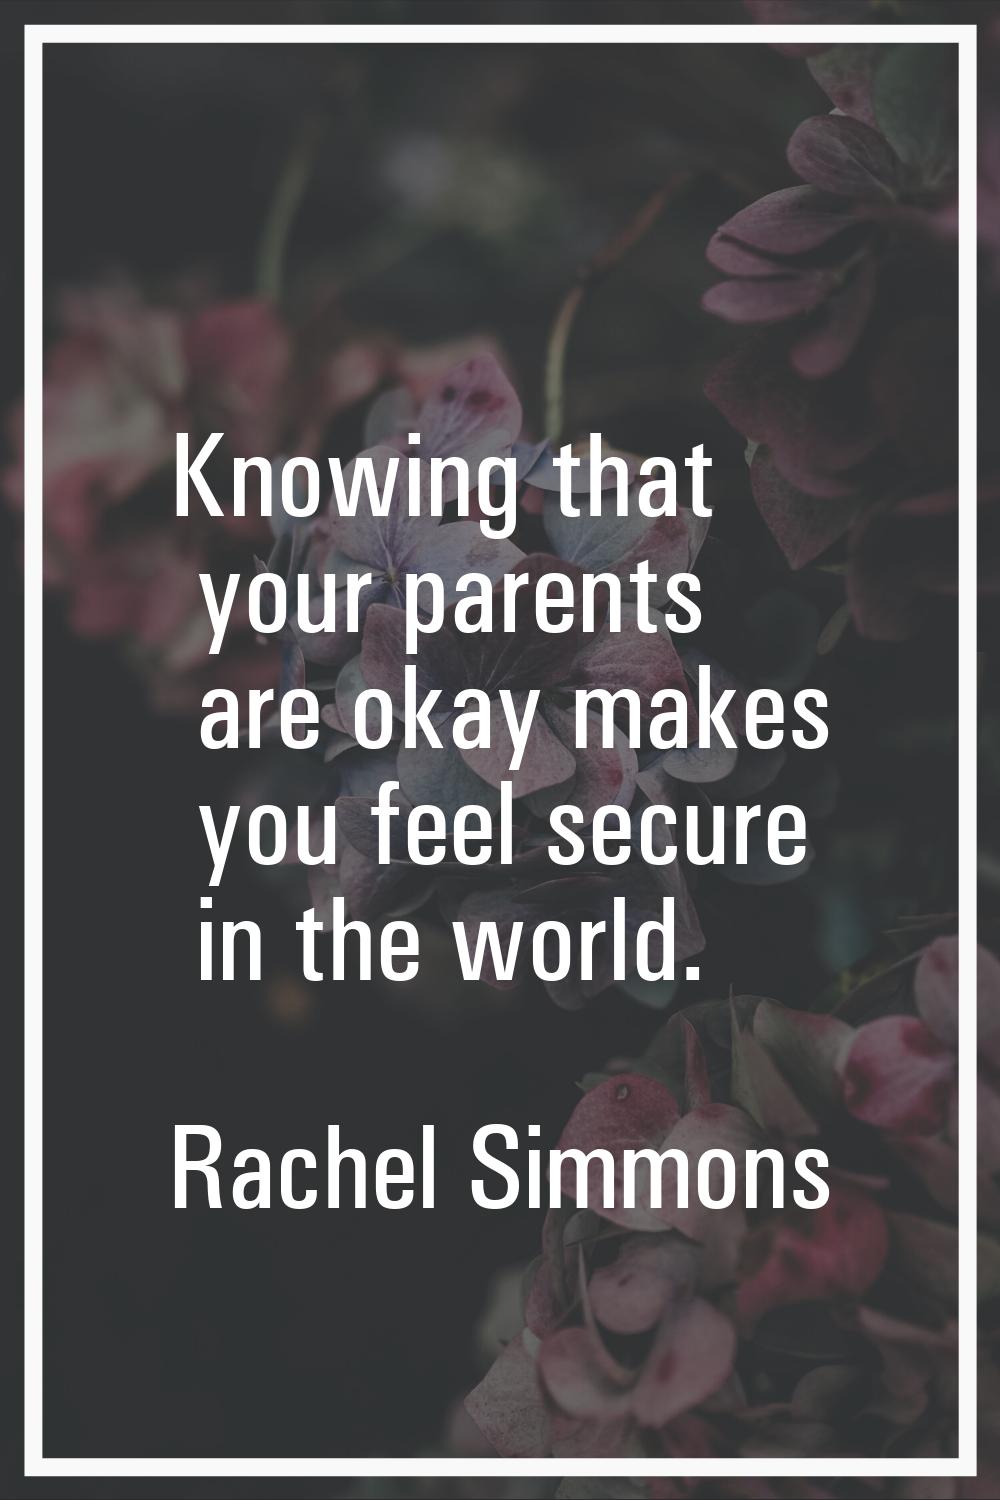 Knowing that your parents are okay makes you feel secure in the world.